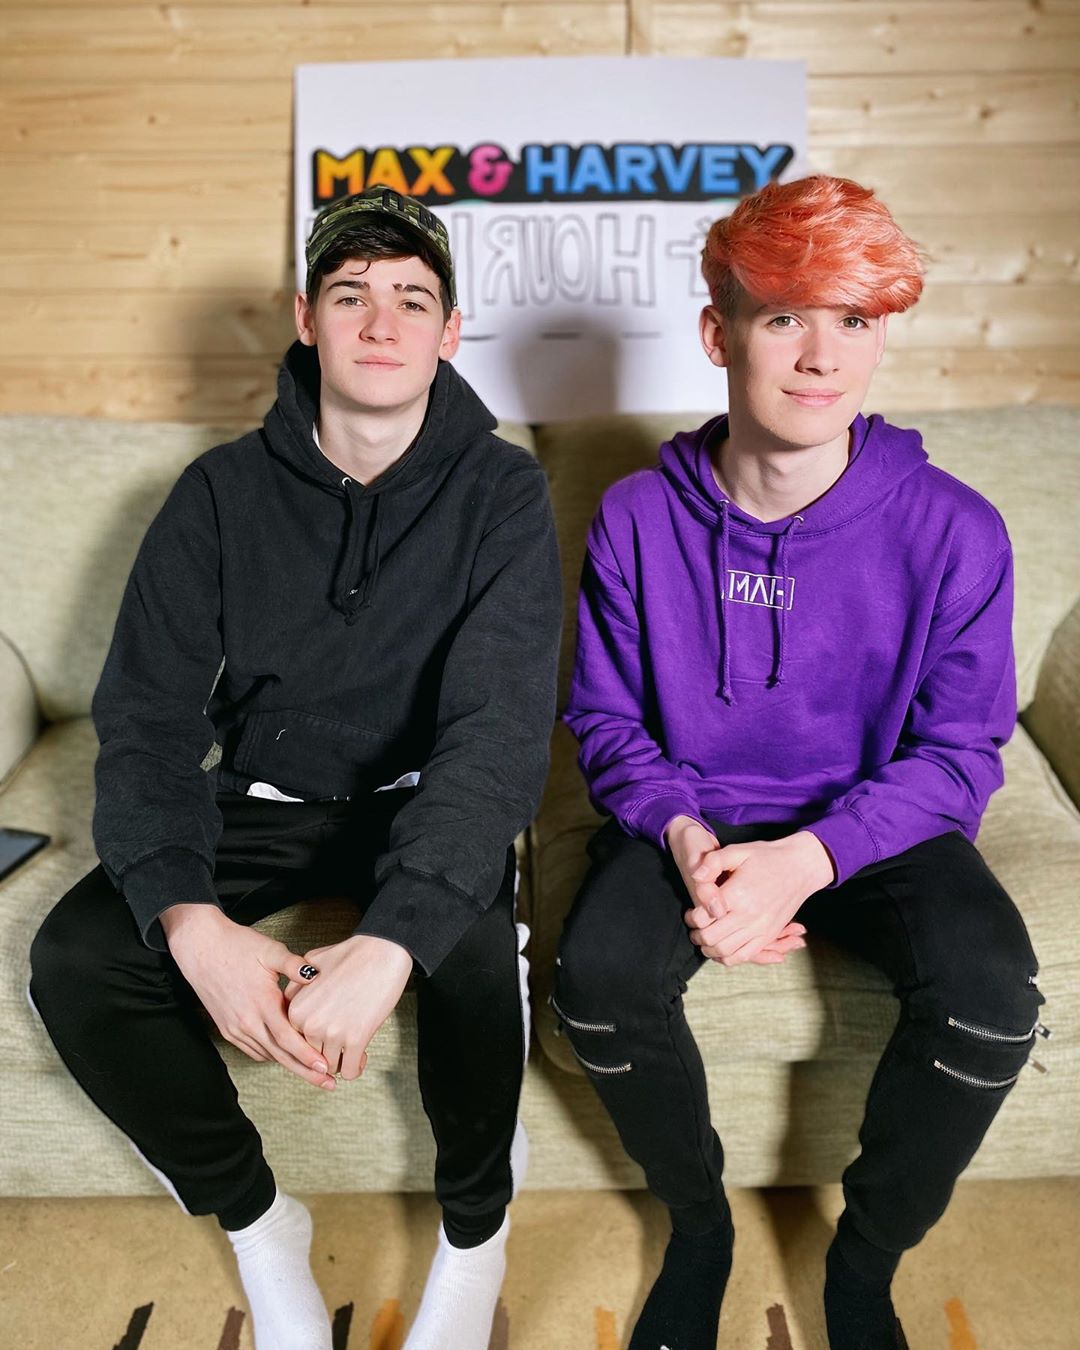 General photo of Max and Harvey